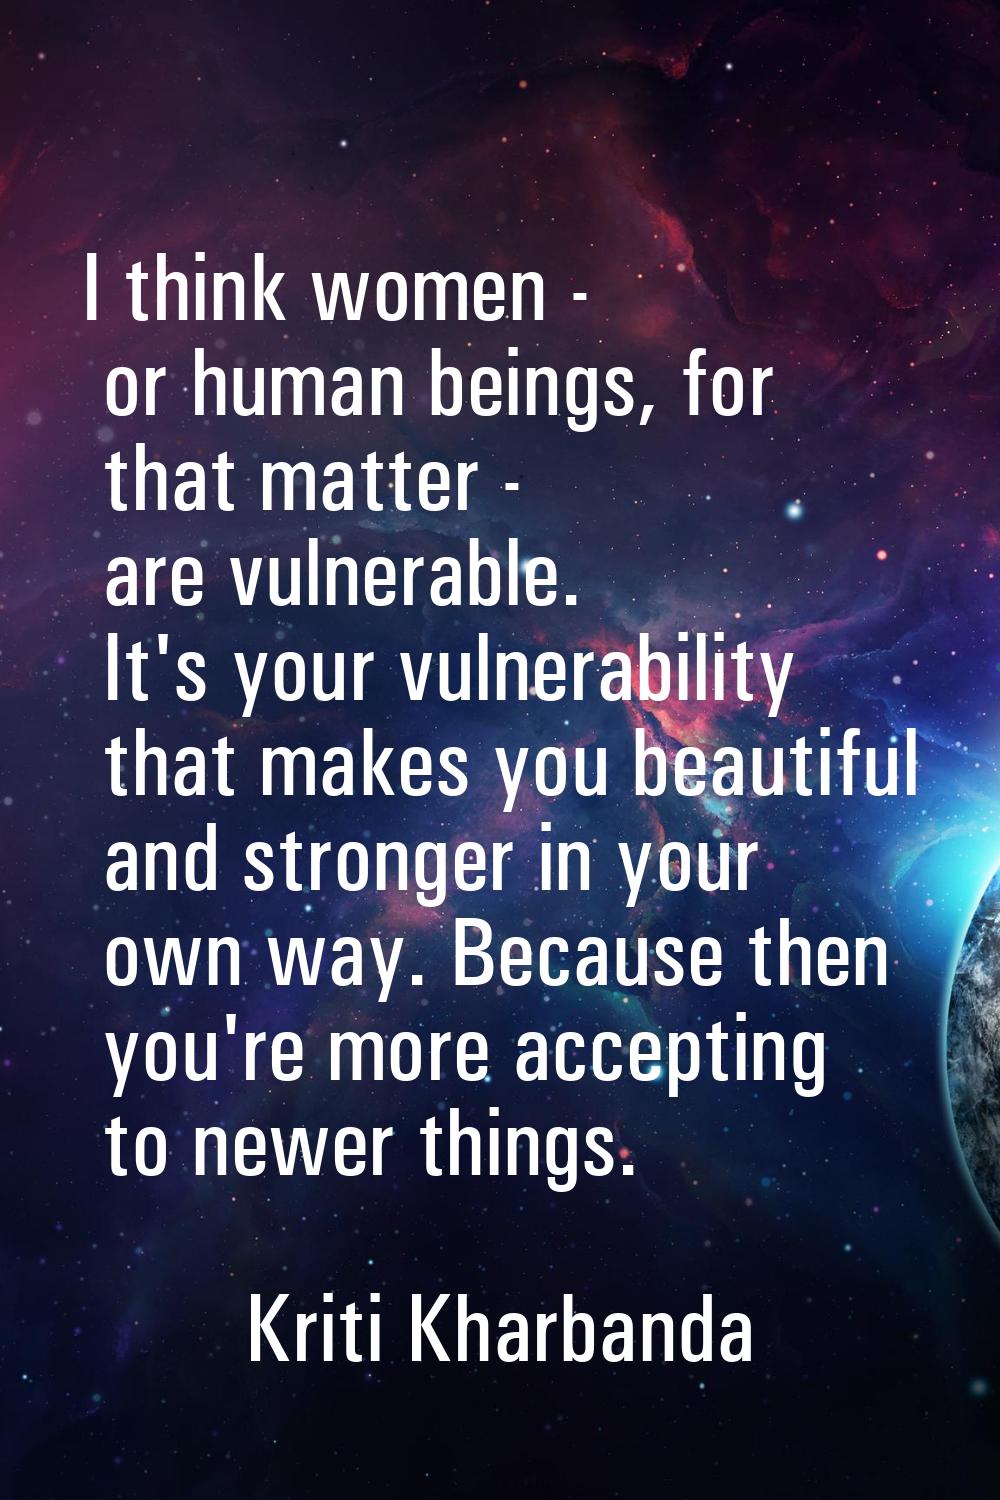 I think women - or human beings, for that matter - are vulnerable. It's your vulnerability that mak